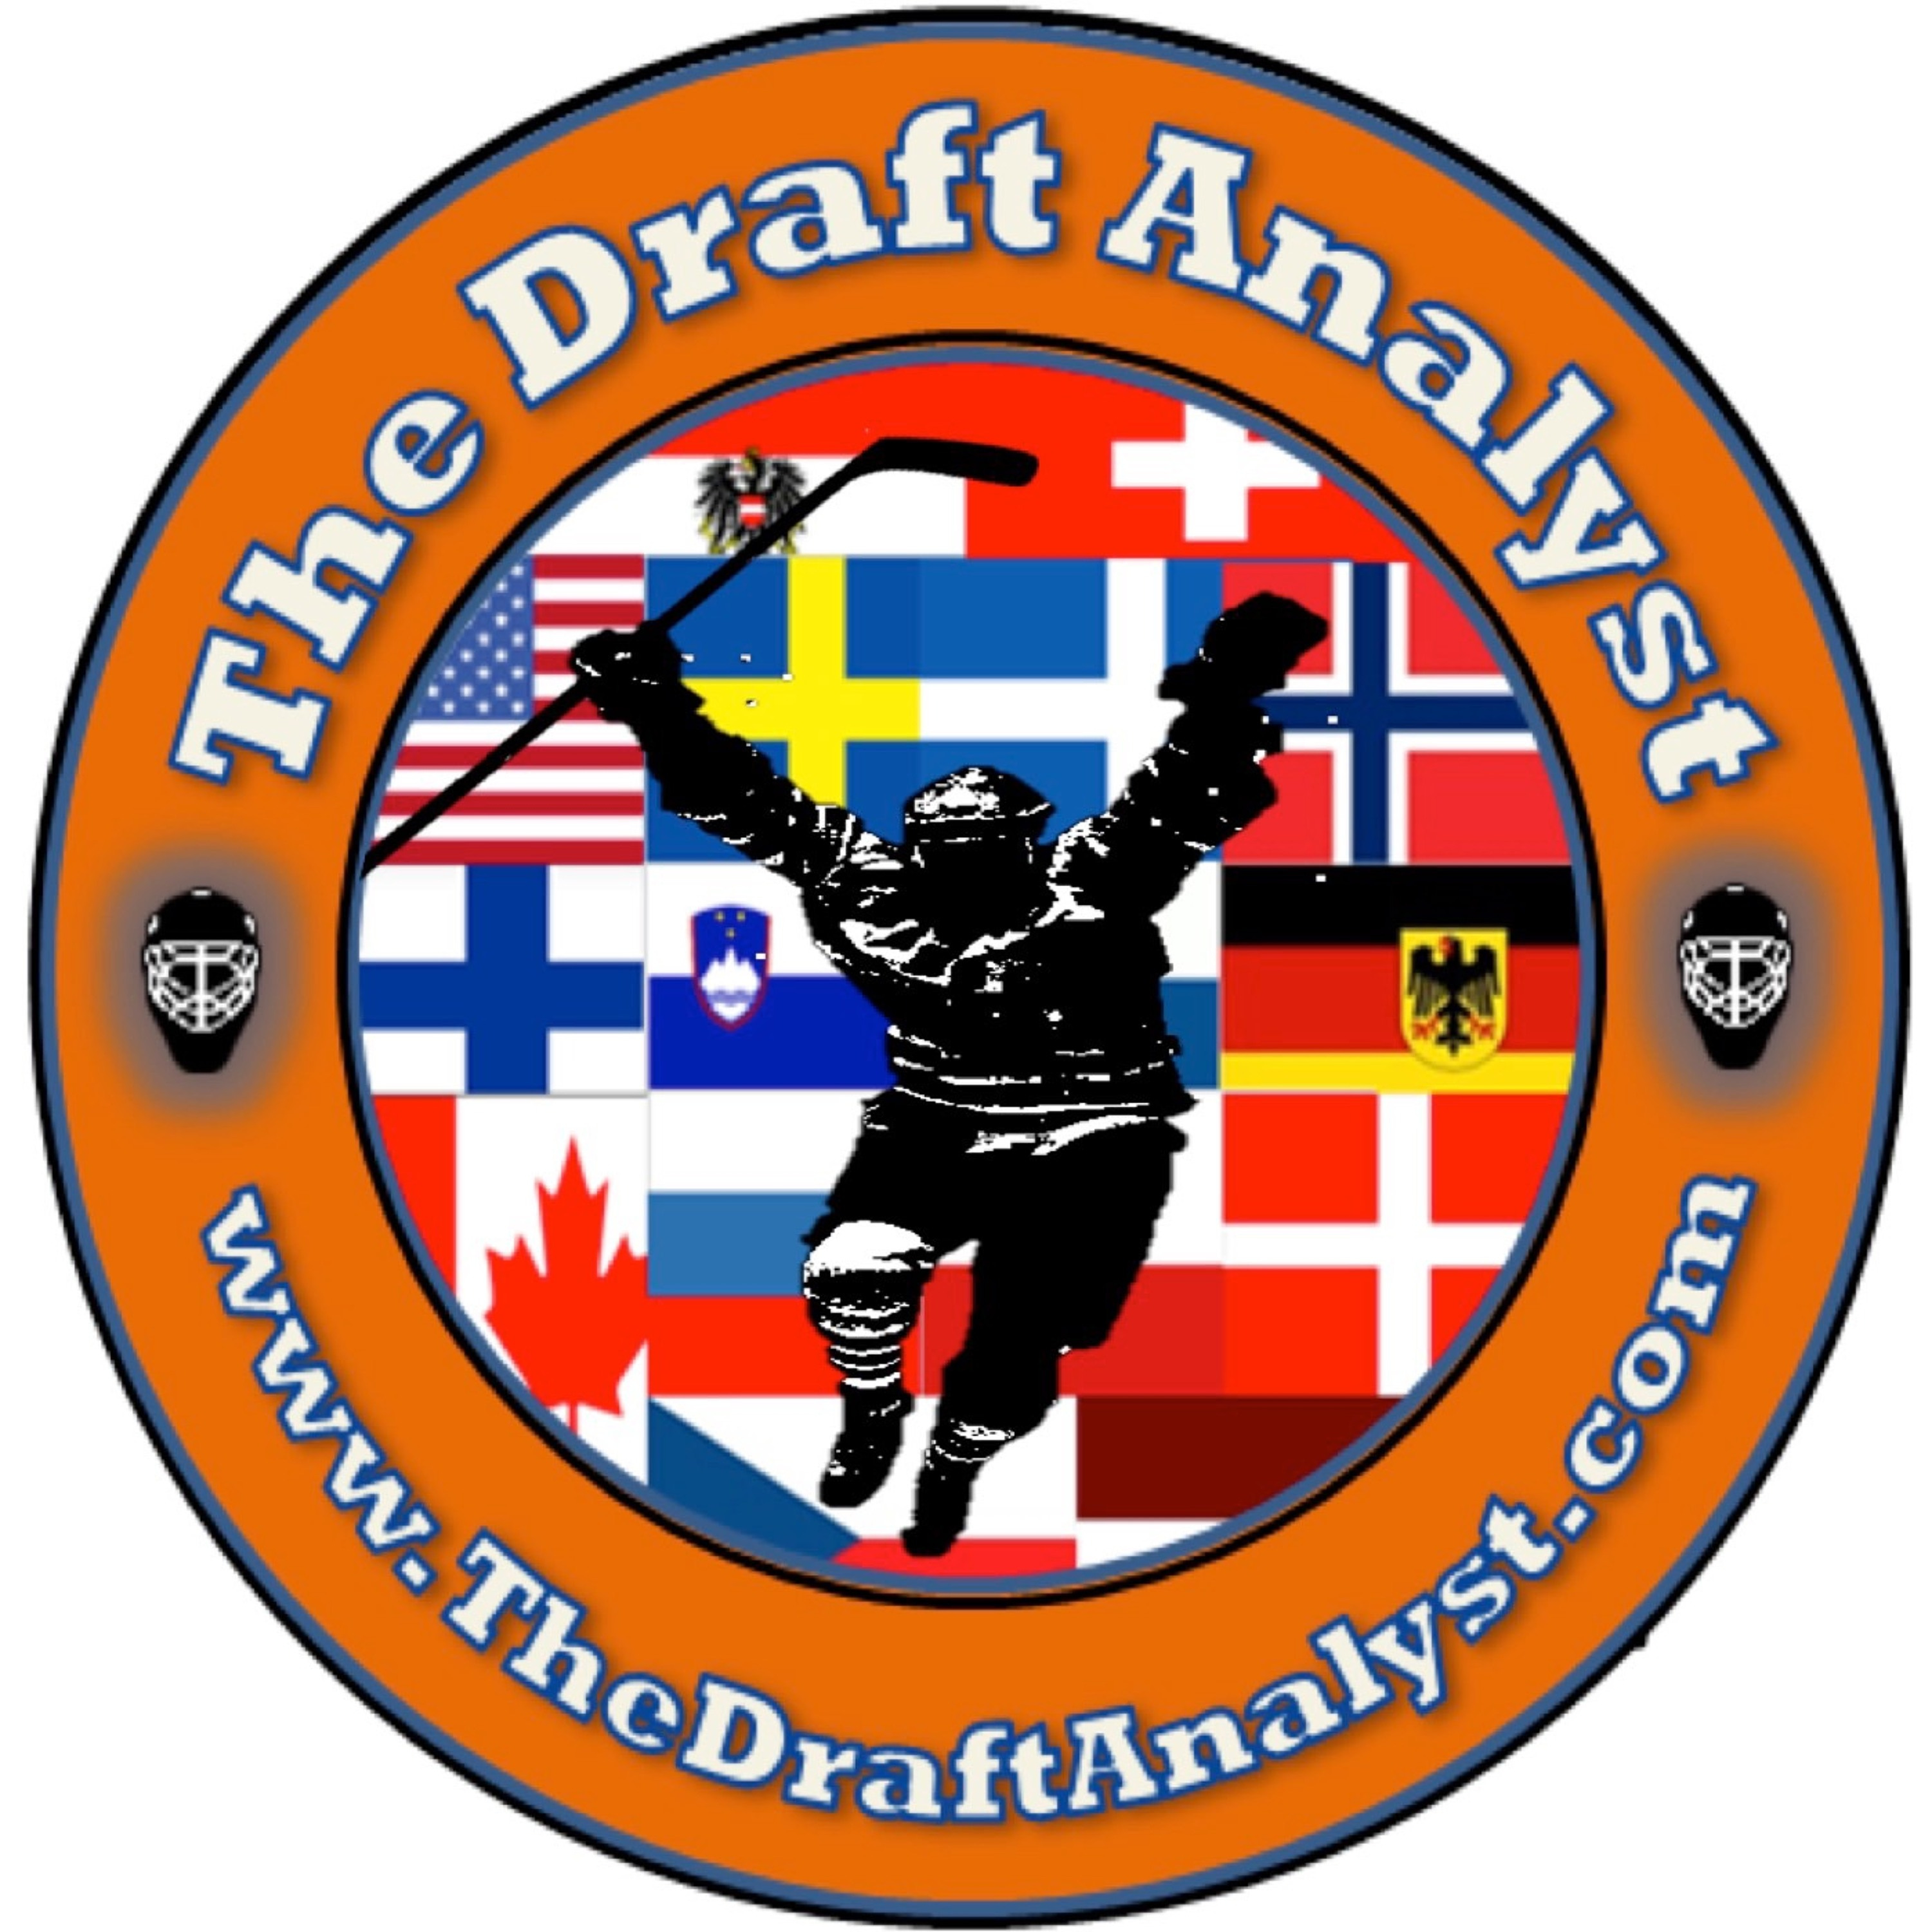 Episode 11 06/15/17: 2017 NHL Draft Preview